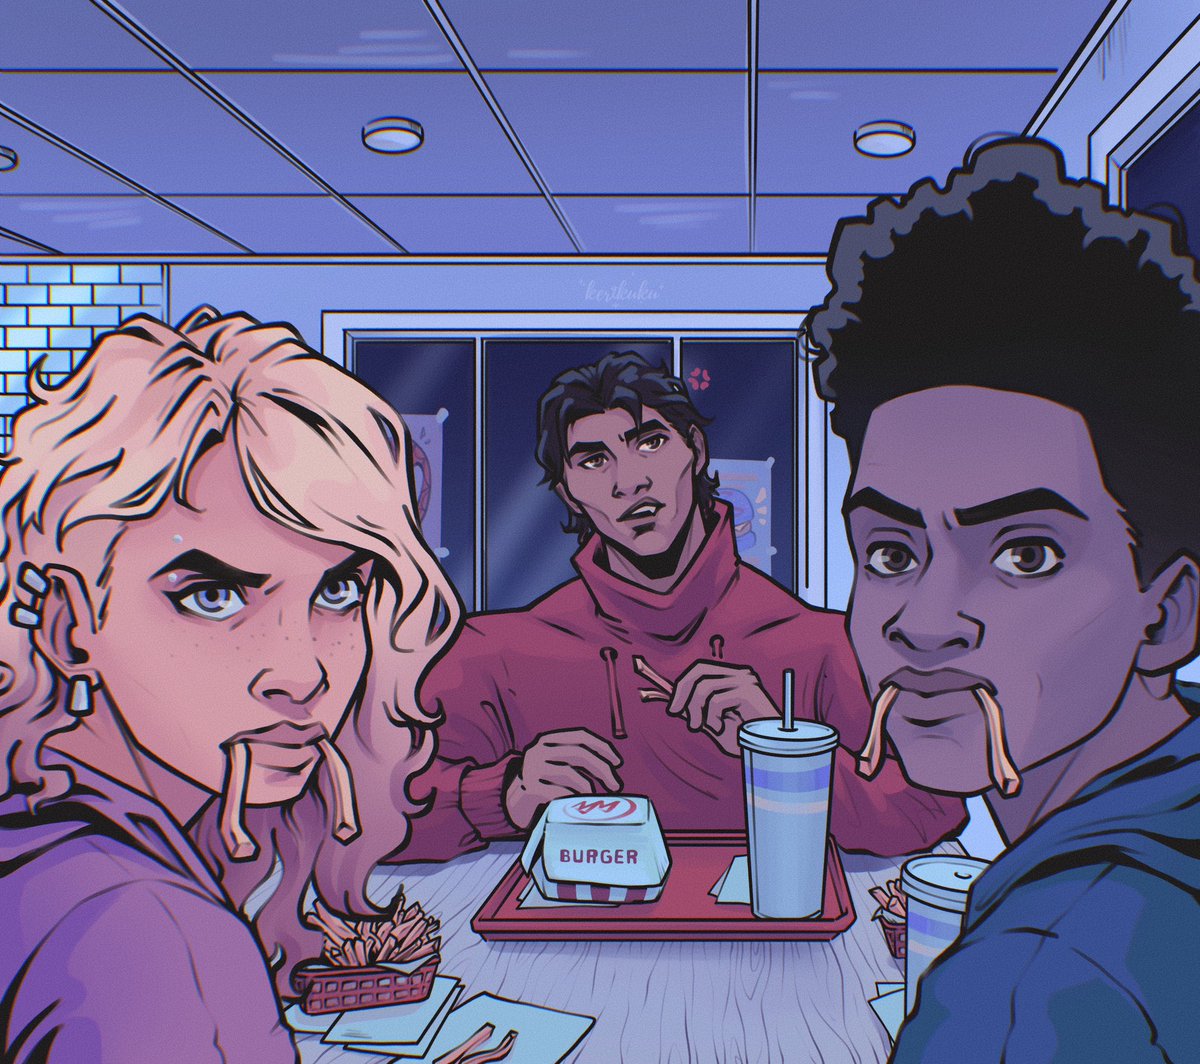 They seem to be mimicking Miguel 😁
#GwenStacy #MilesMorales #MiguelOHara #SpiderVerse